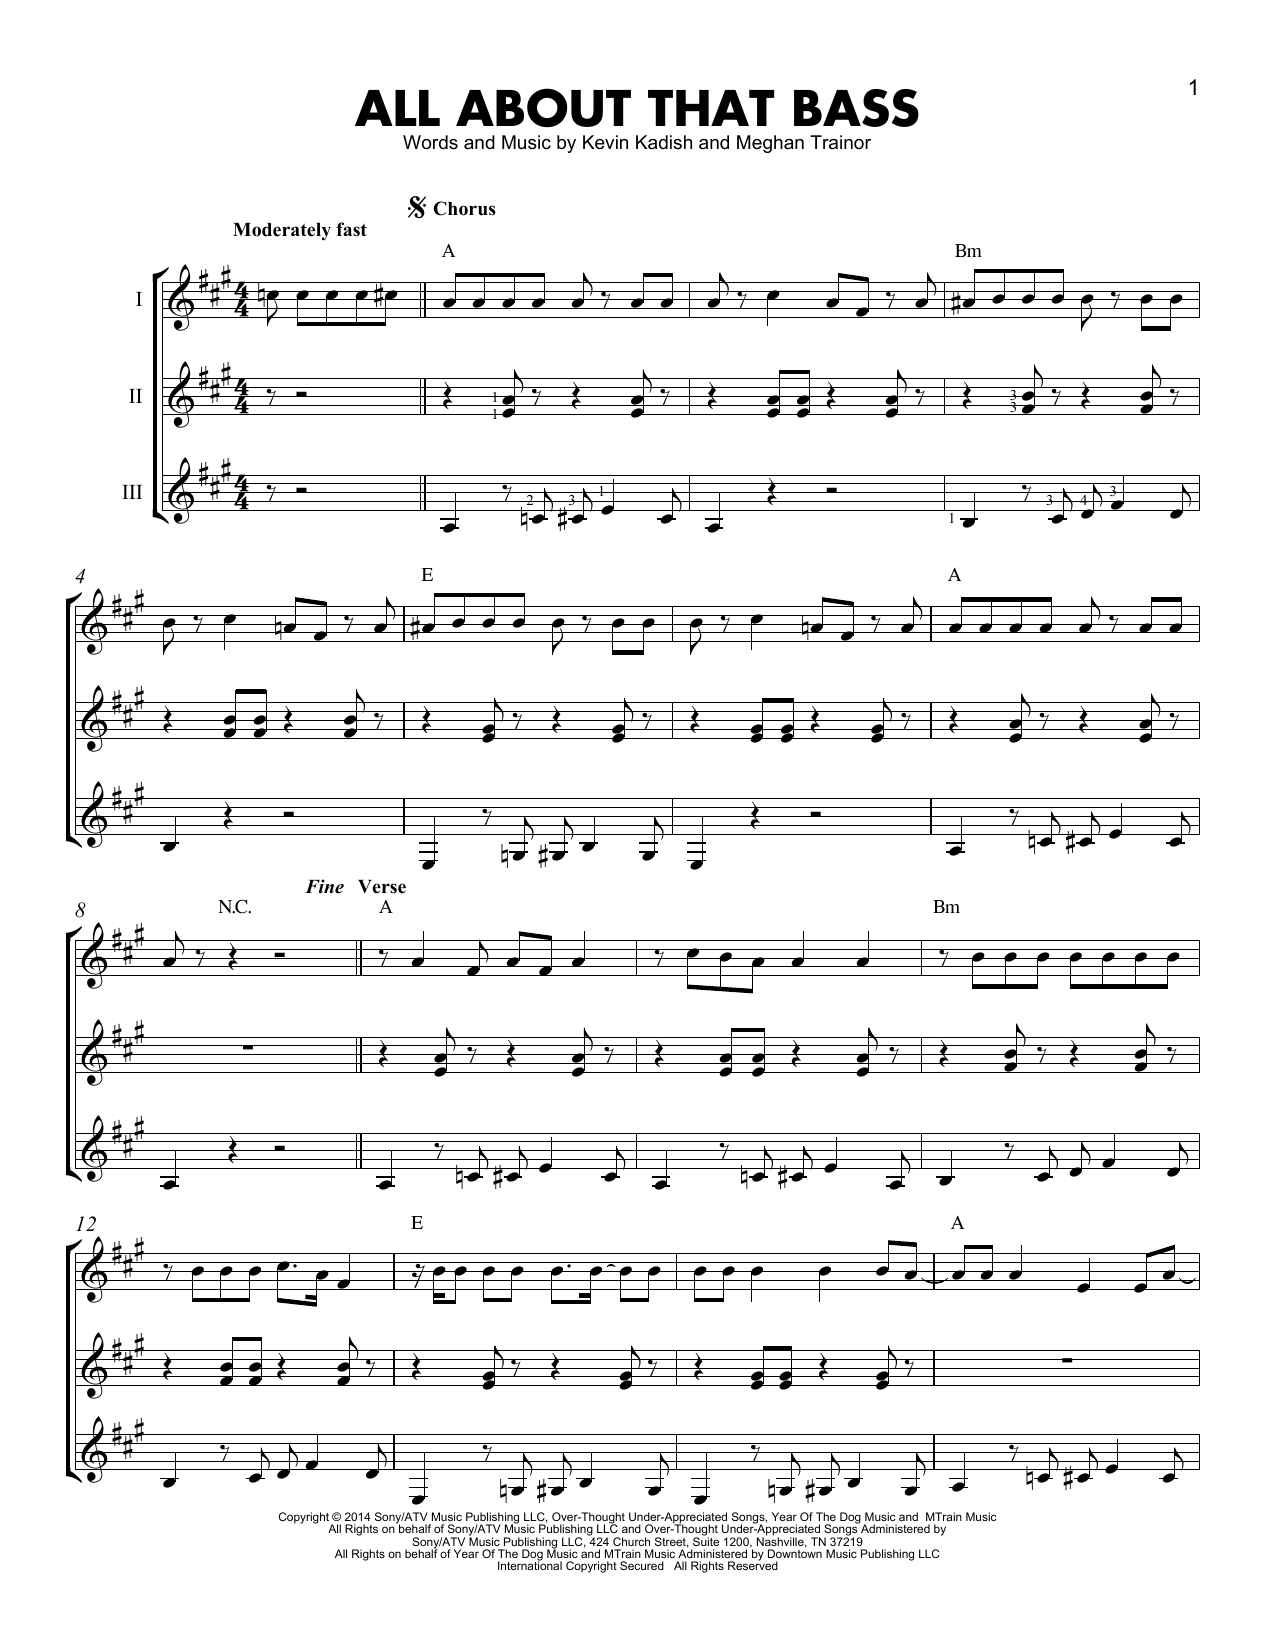 Download Meghan Trainor All About That Bass Sheet Music